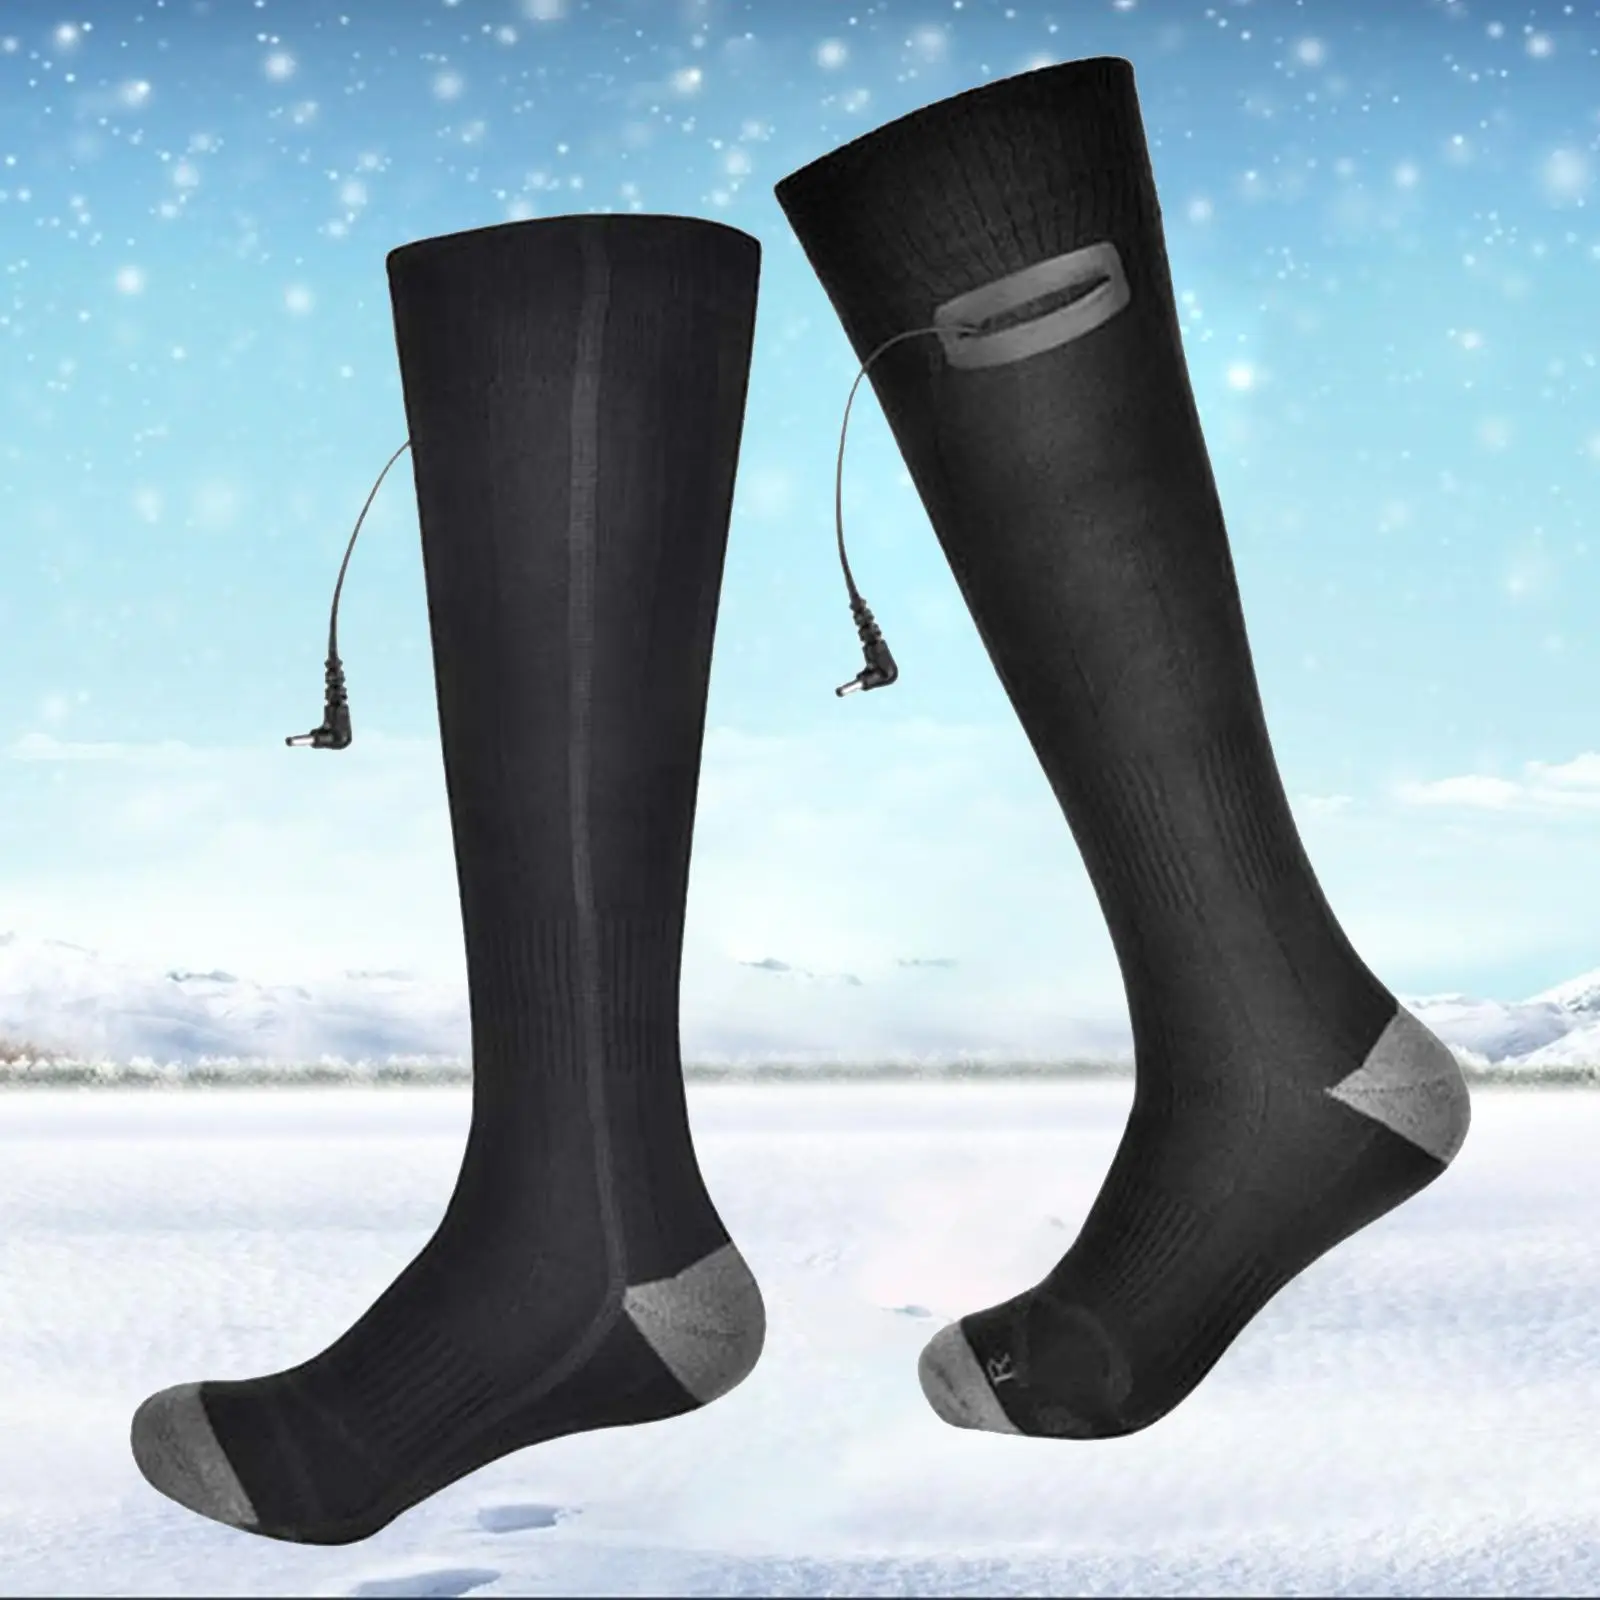 Winter Electric Heated Socks Rechargeable Battery Warmer Ski Boot Socks Heating Sock for Climbing Riding Camping Skiing Hiking